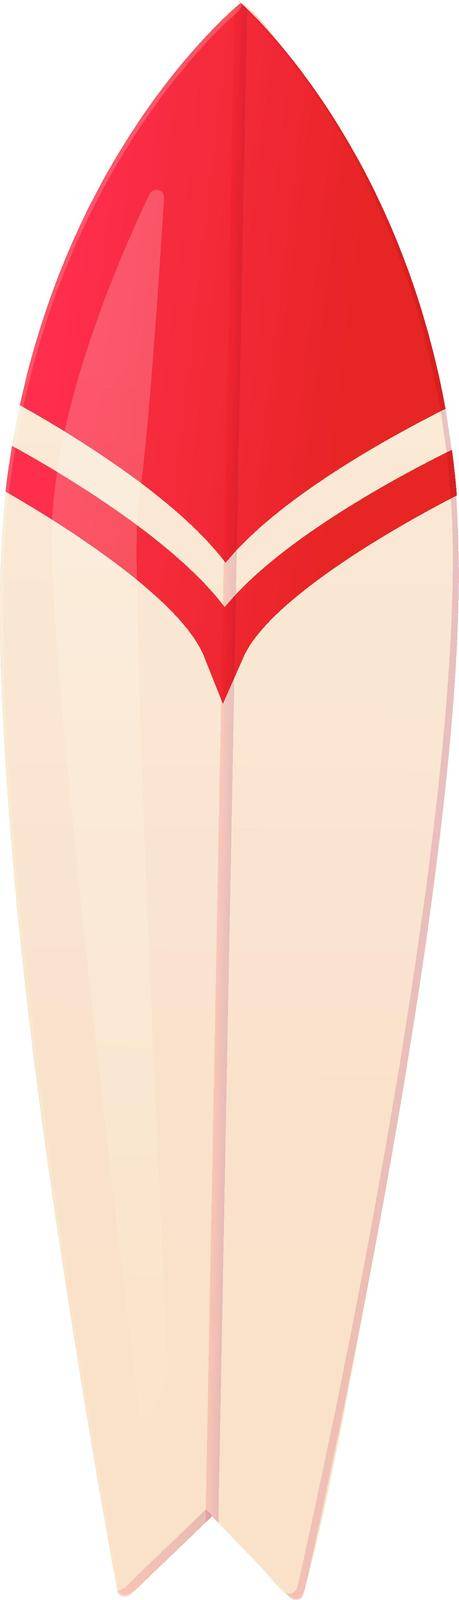 Surfboard red and white in realistic cartoon style. Active summer leisure concept.